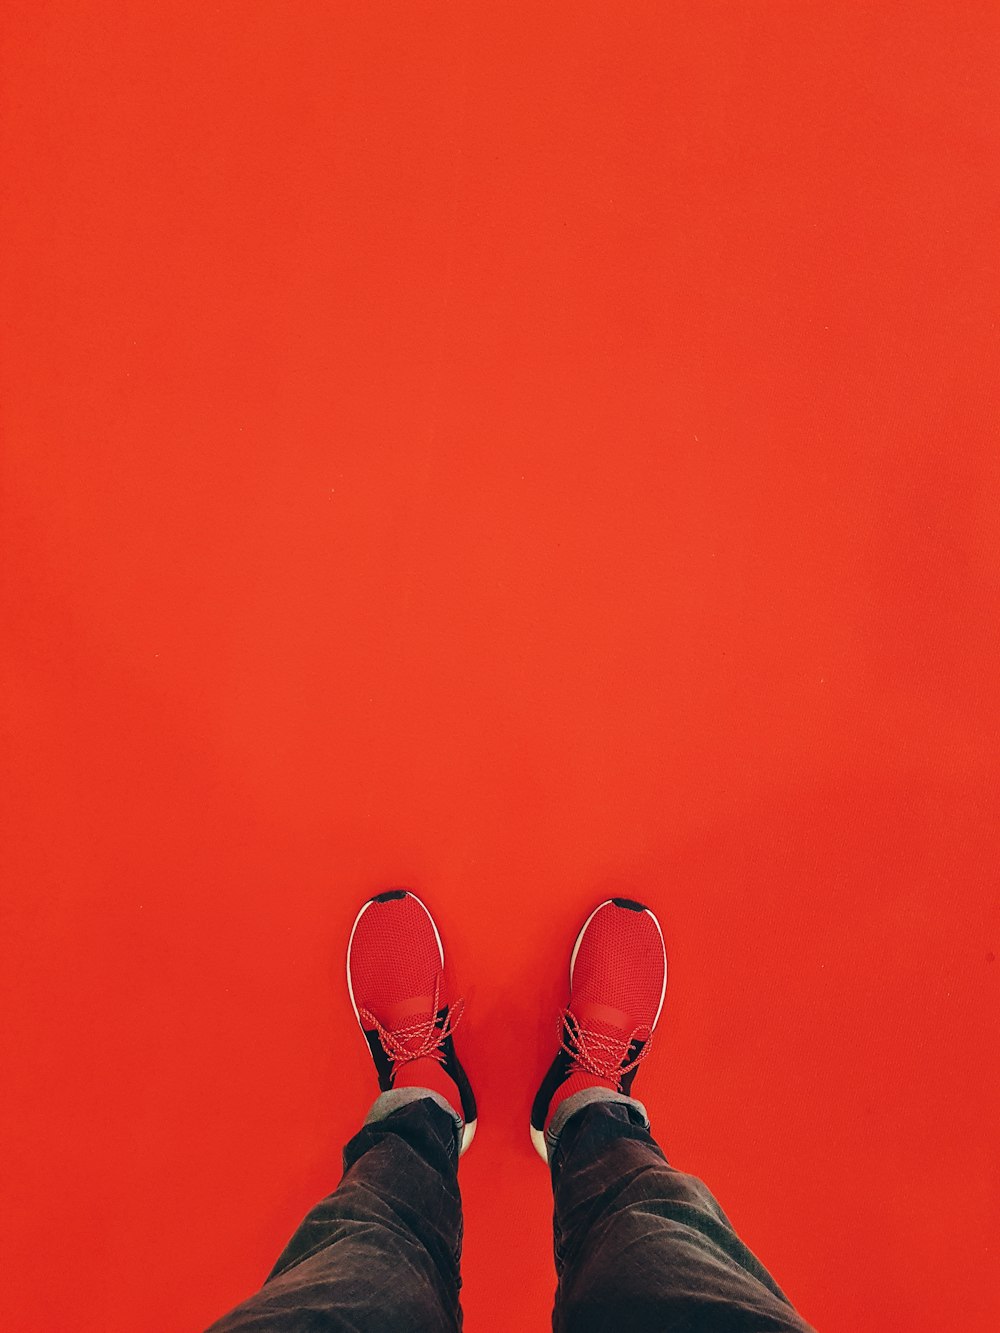 person wearing red running shoe